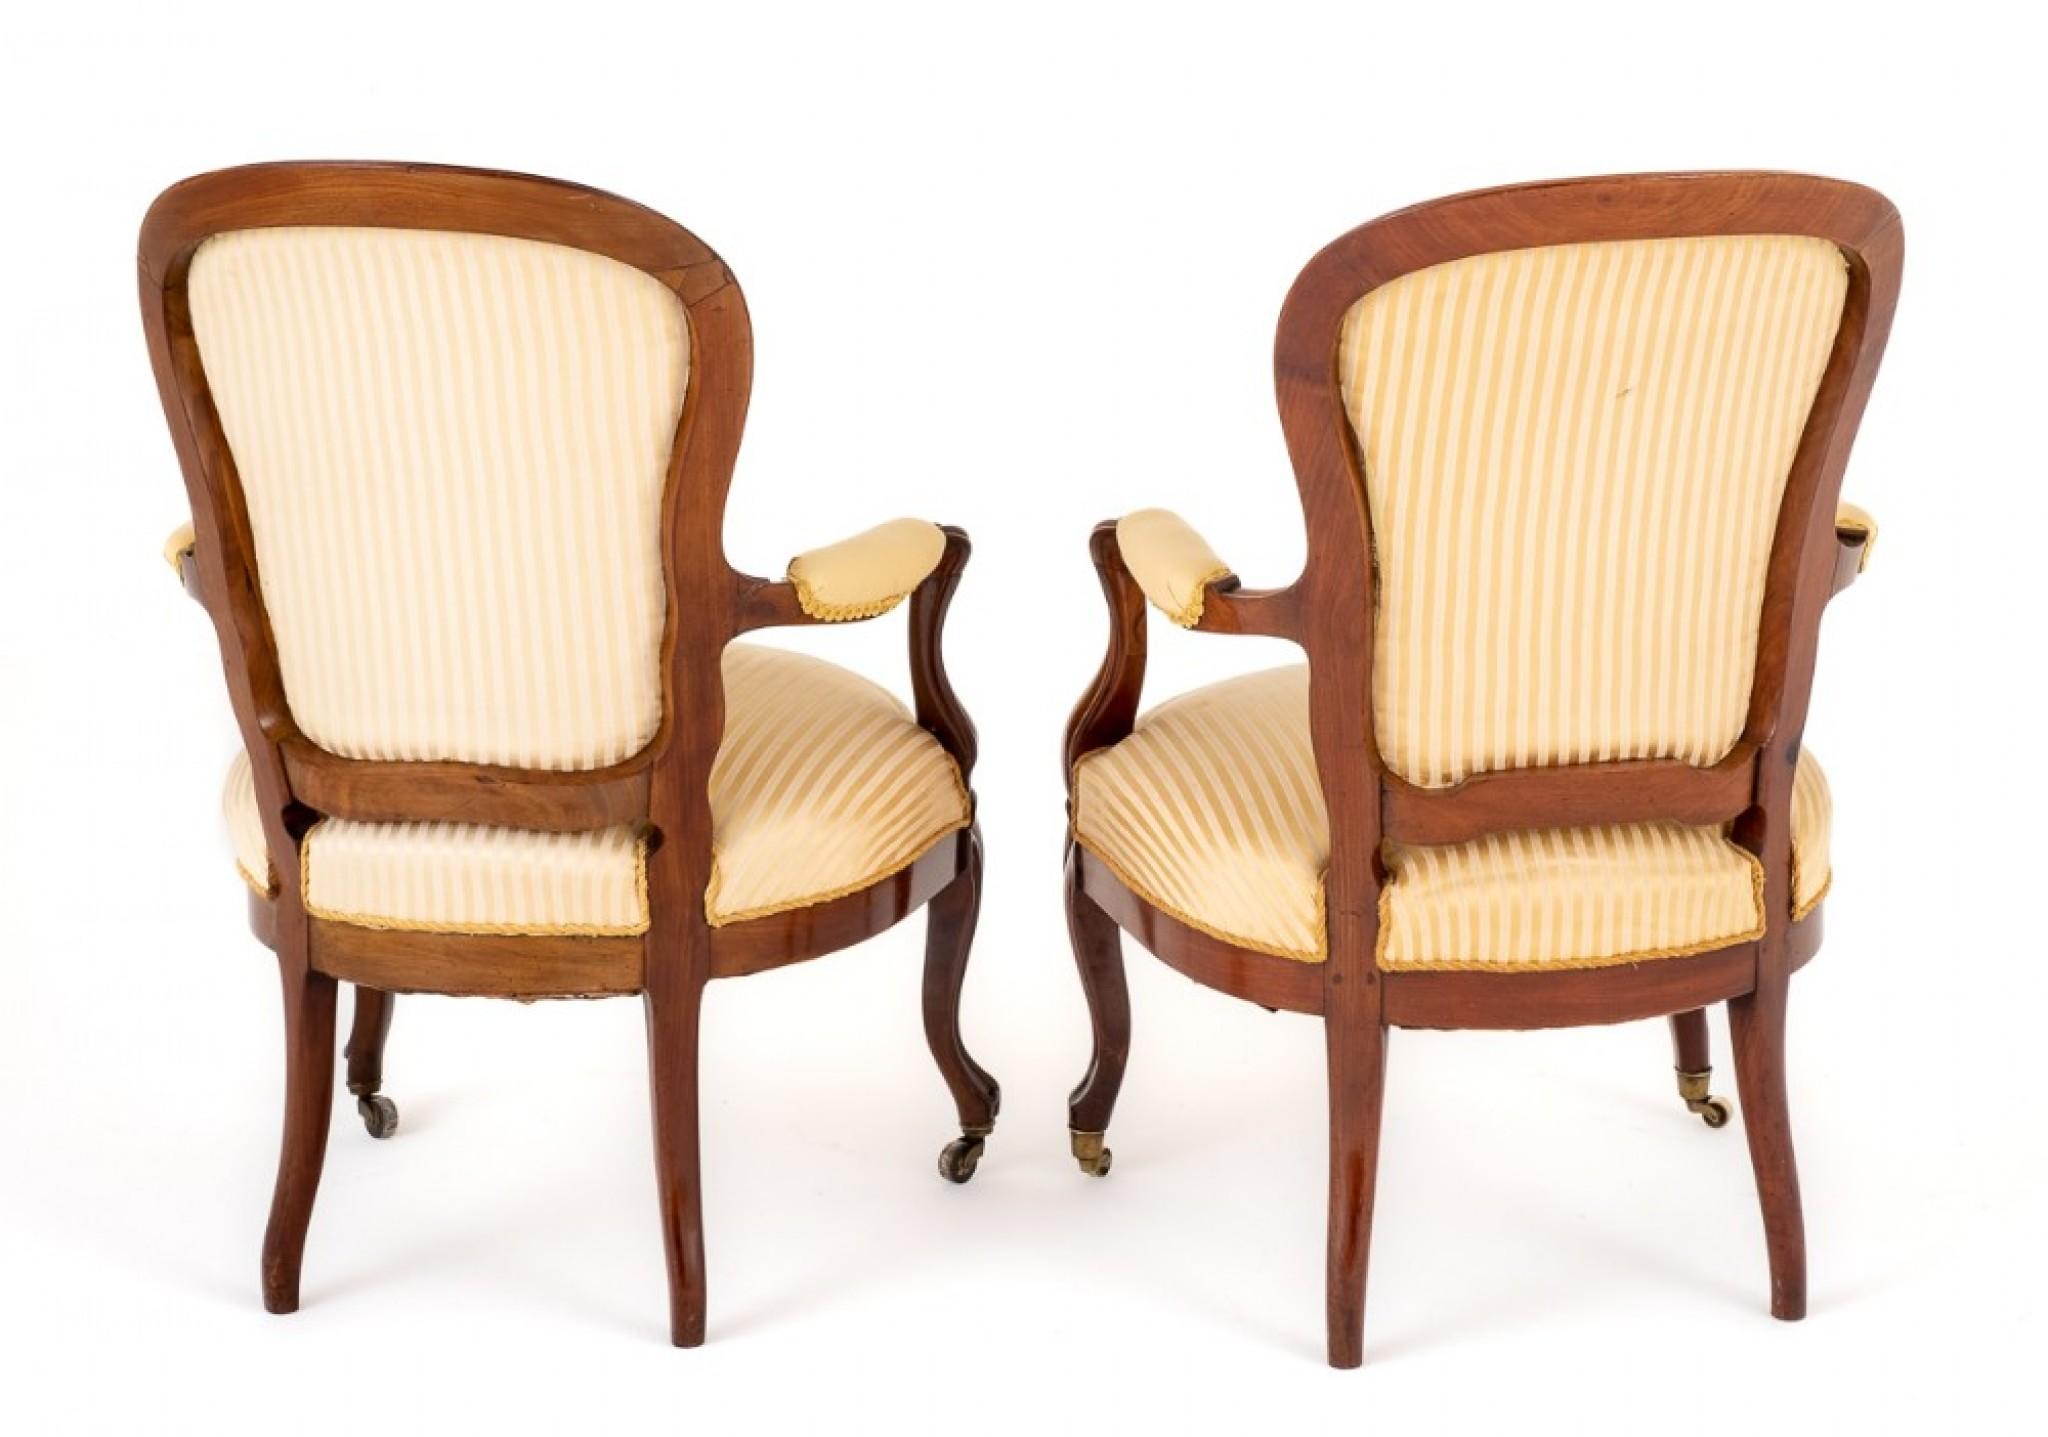 Rosewood Pair Victorian Arm Chairs Salon Chair 1870 For Sale